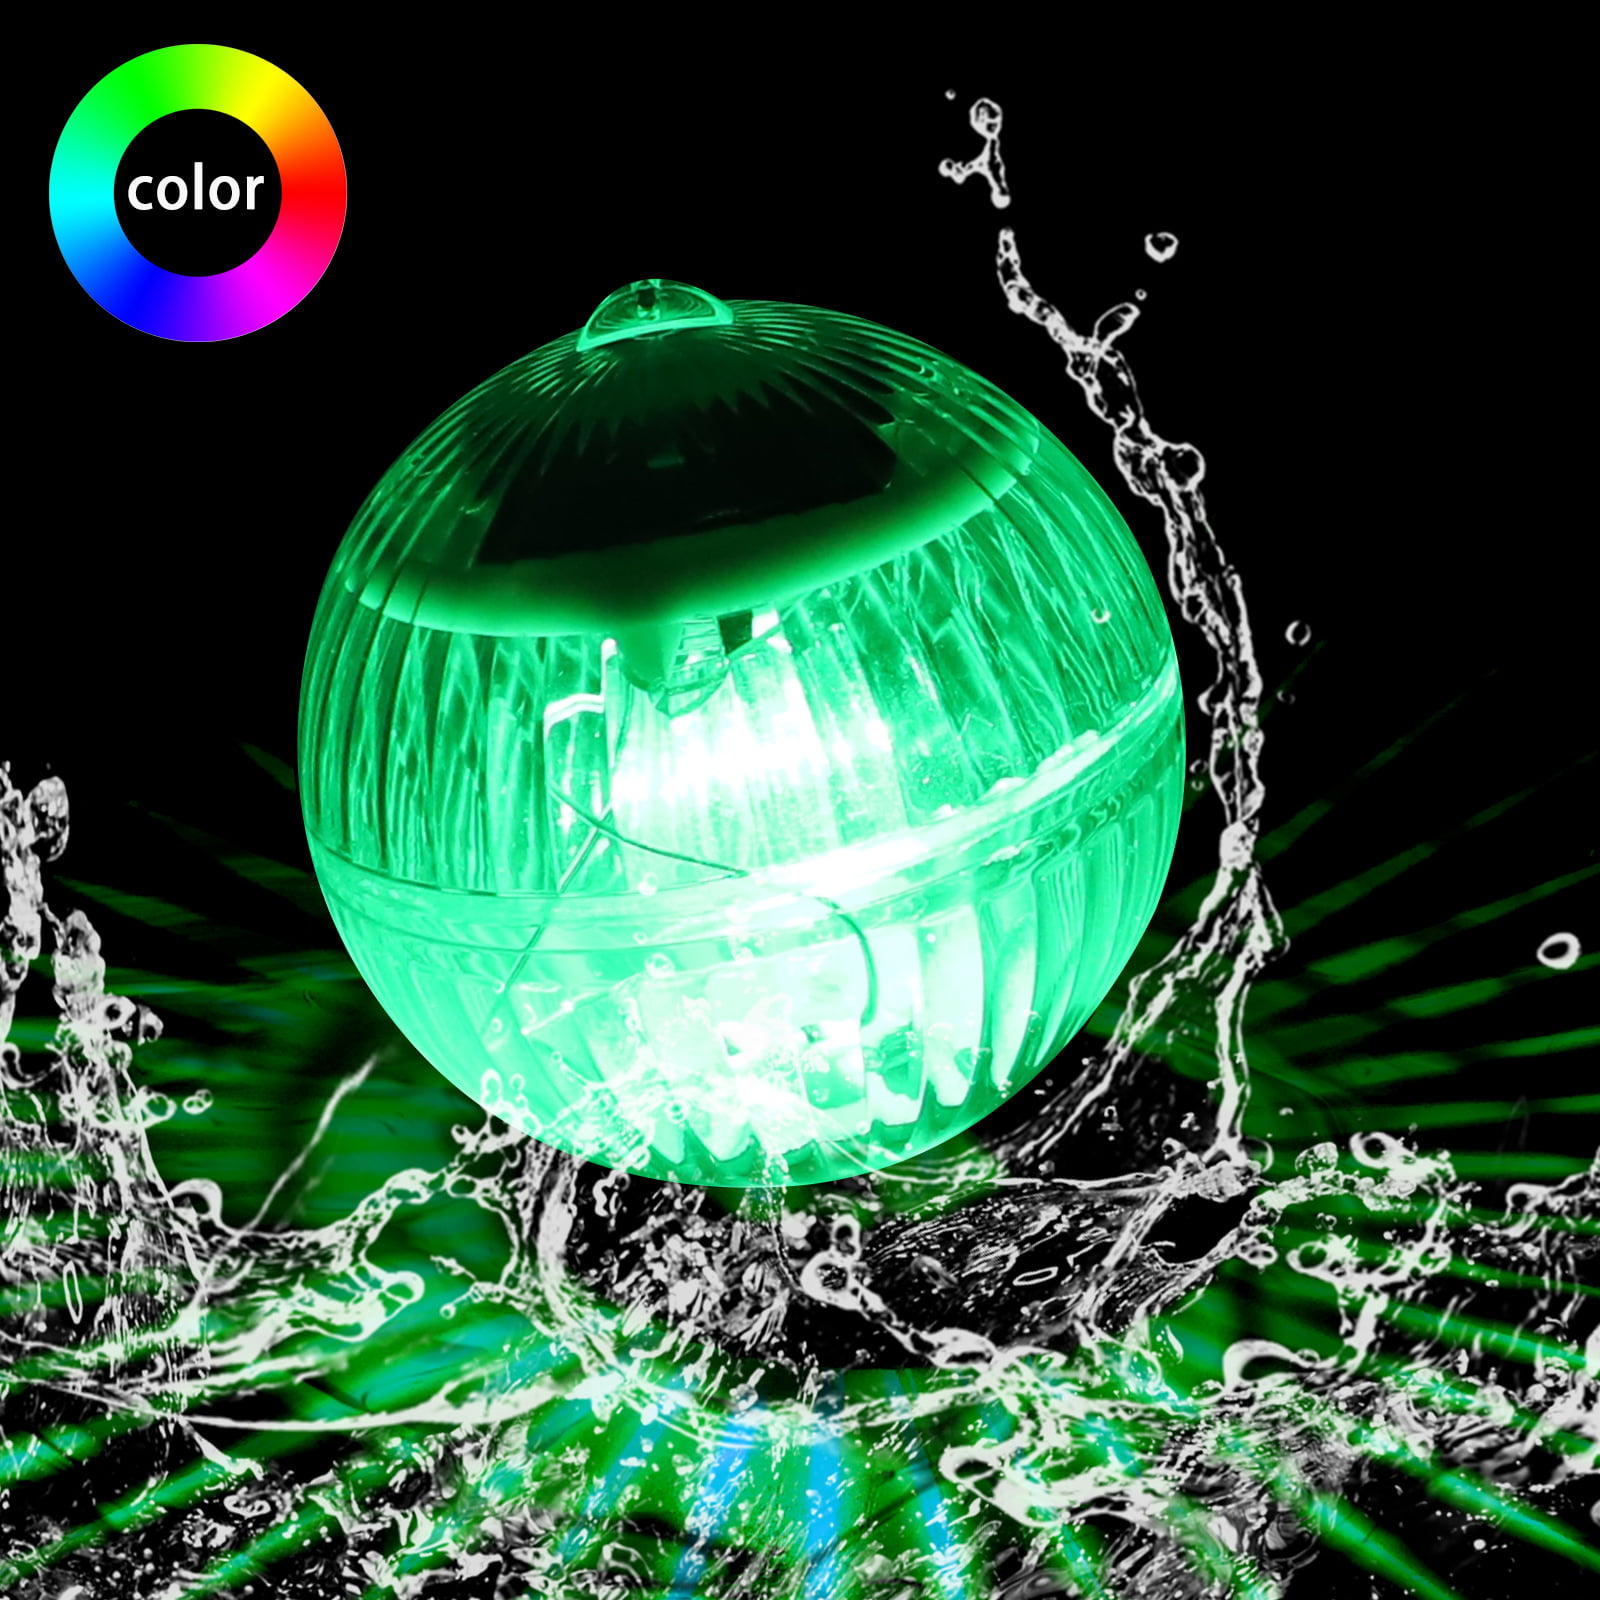 LED Floating Ball Light Flashing Mood Swiming Pool Pond Outdoor Party Home Decor 